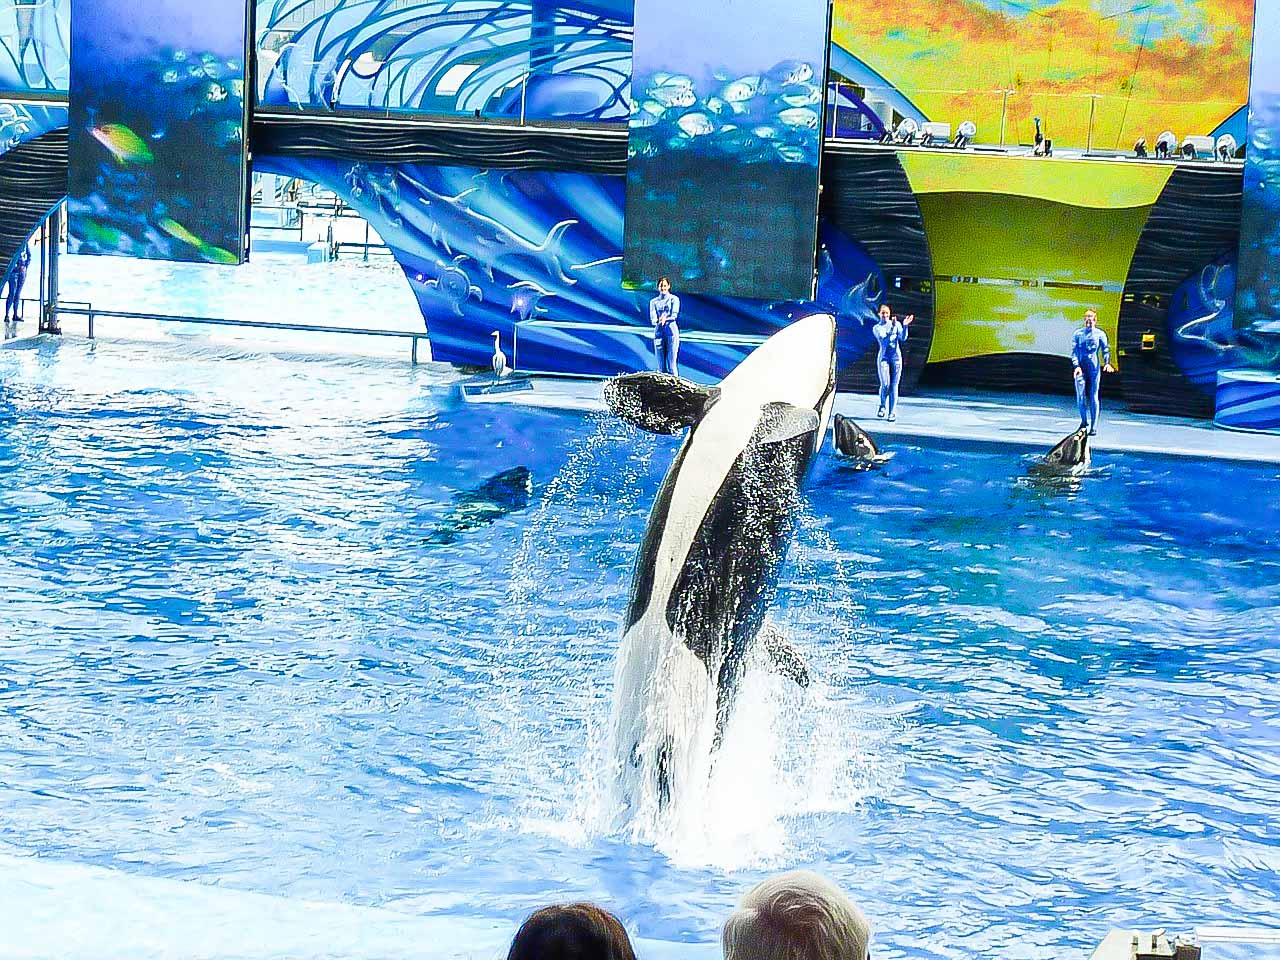 SeaWorld Orlando: Must-See Attractions and Shows